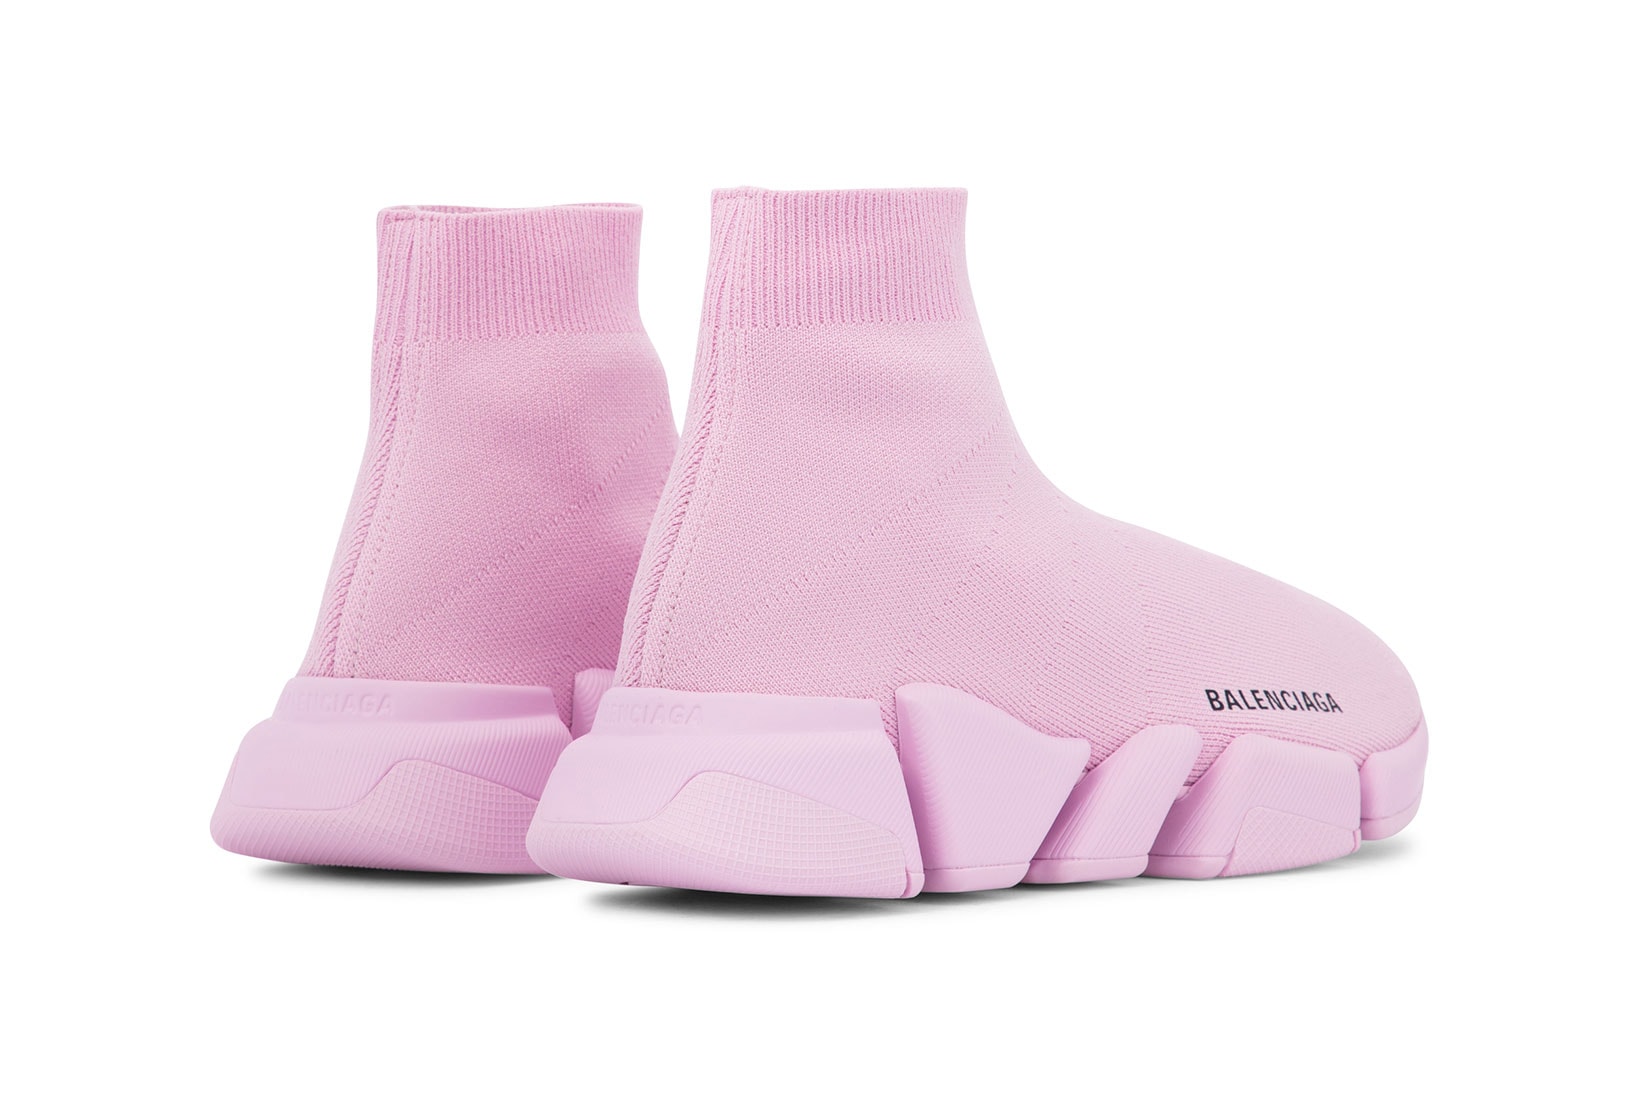 balenciaga speed 2 0 sneakers light pink colorway shoes footwear designer shoes